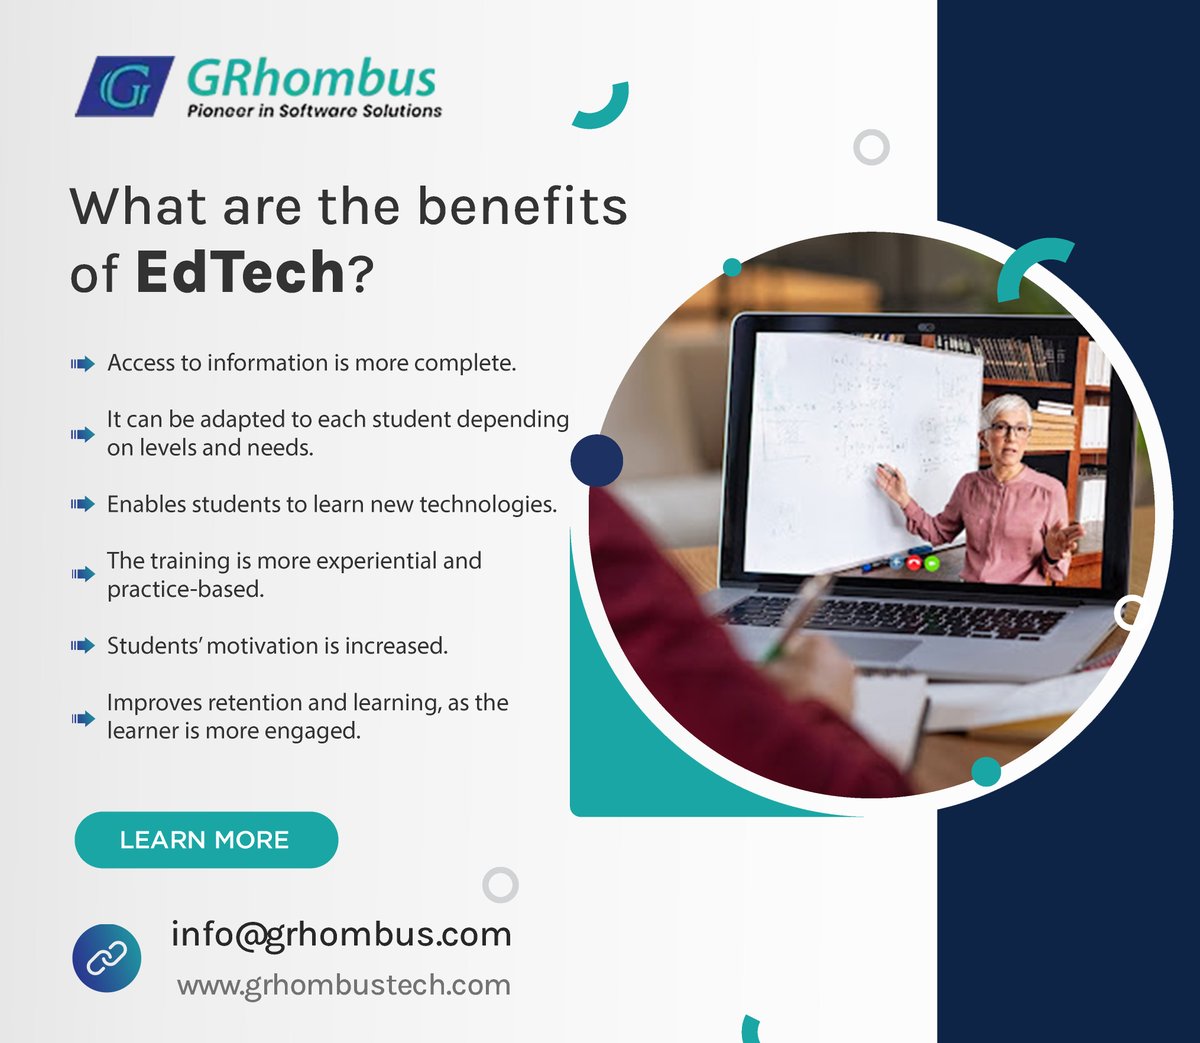 Students have the freedom to acquire education from the sources they find most useful and productive thanks to #EdTech. 

🌎 grhombustech.com/edtech-develop…

#GRhombus #grhombustech #grhombustechnologies #edtech #edtechdevelopment #elearningdevelopment #software #technology #programming